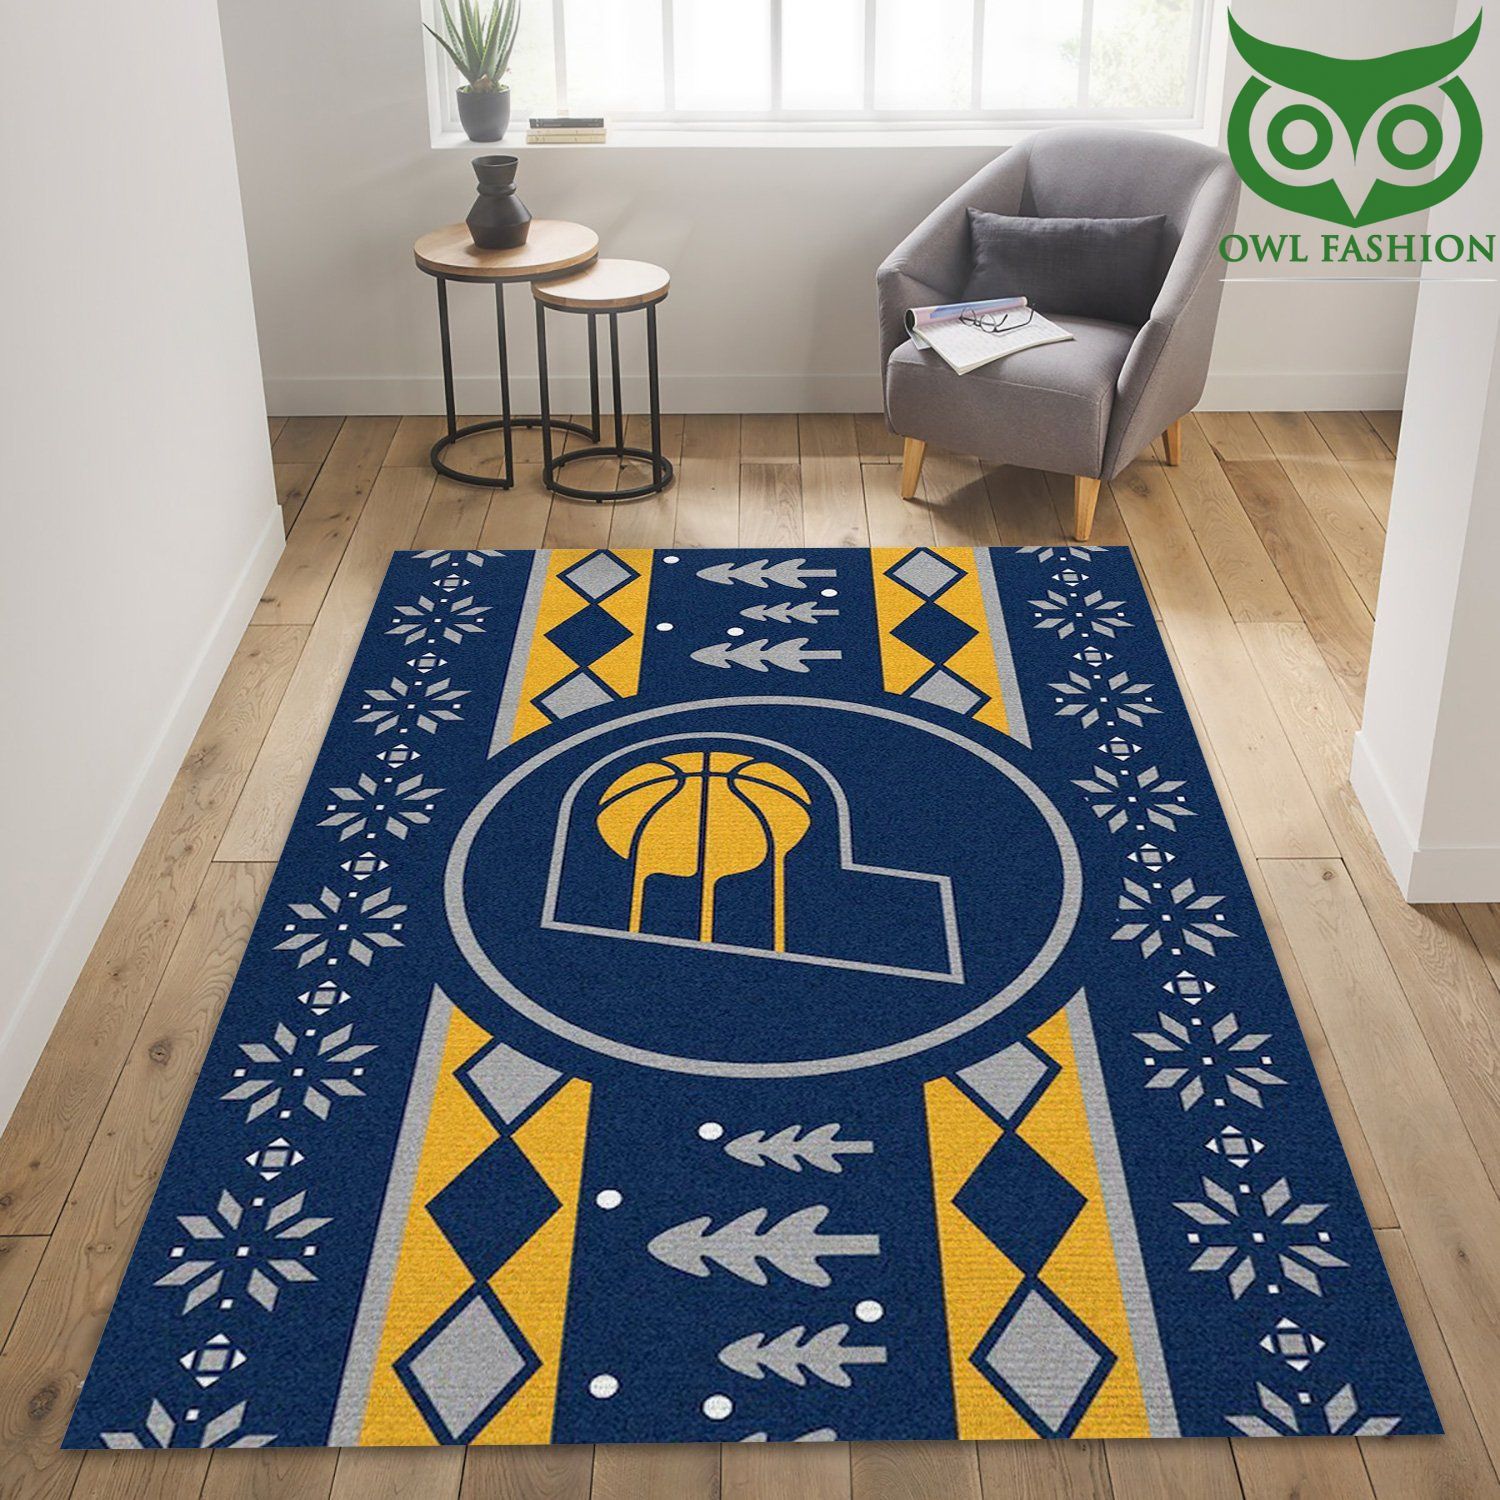 Indiana Pacers Area Rug NBA carpet rug Home and floor Decoration